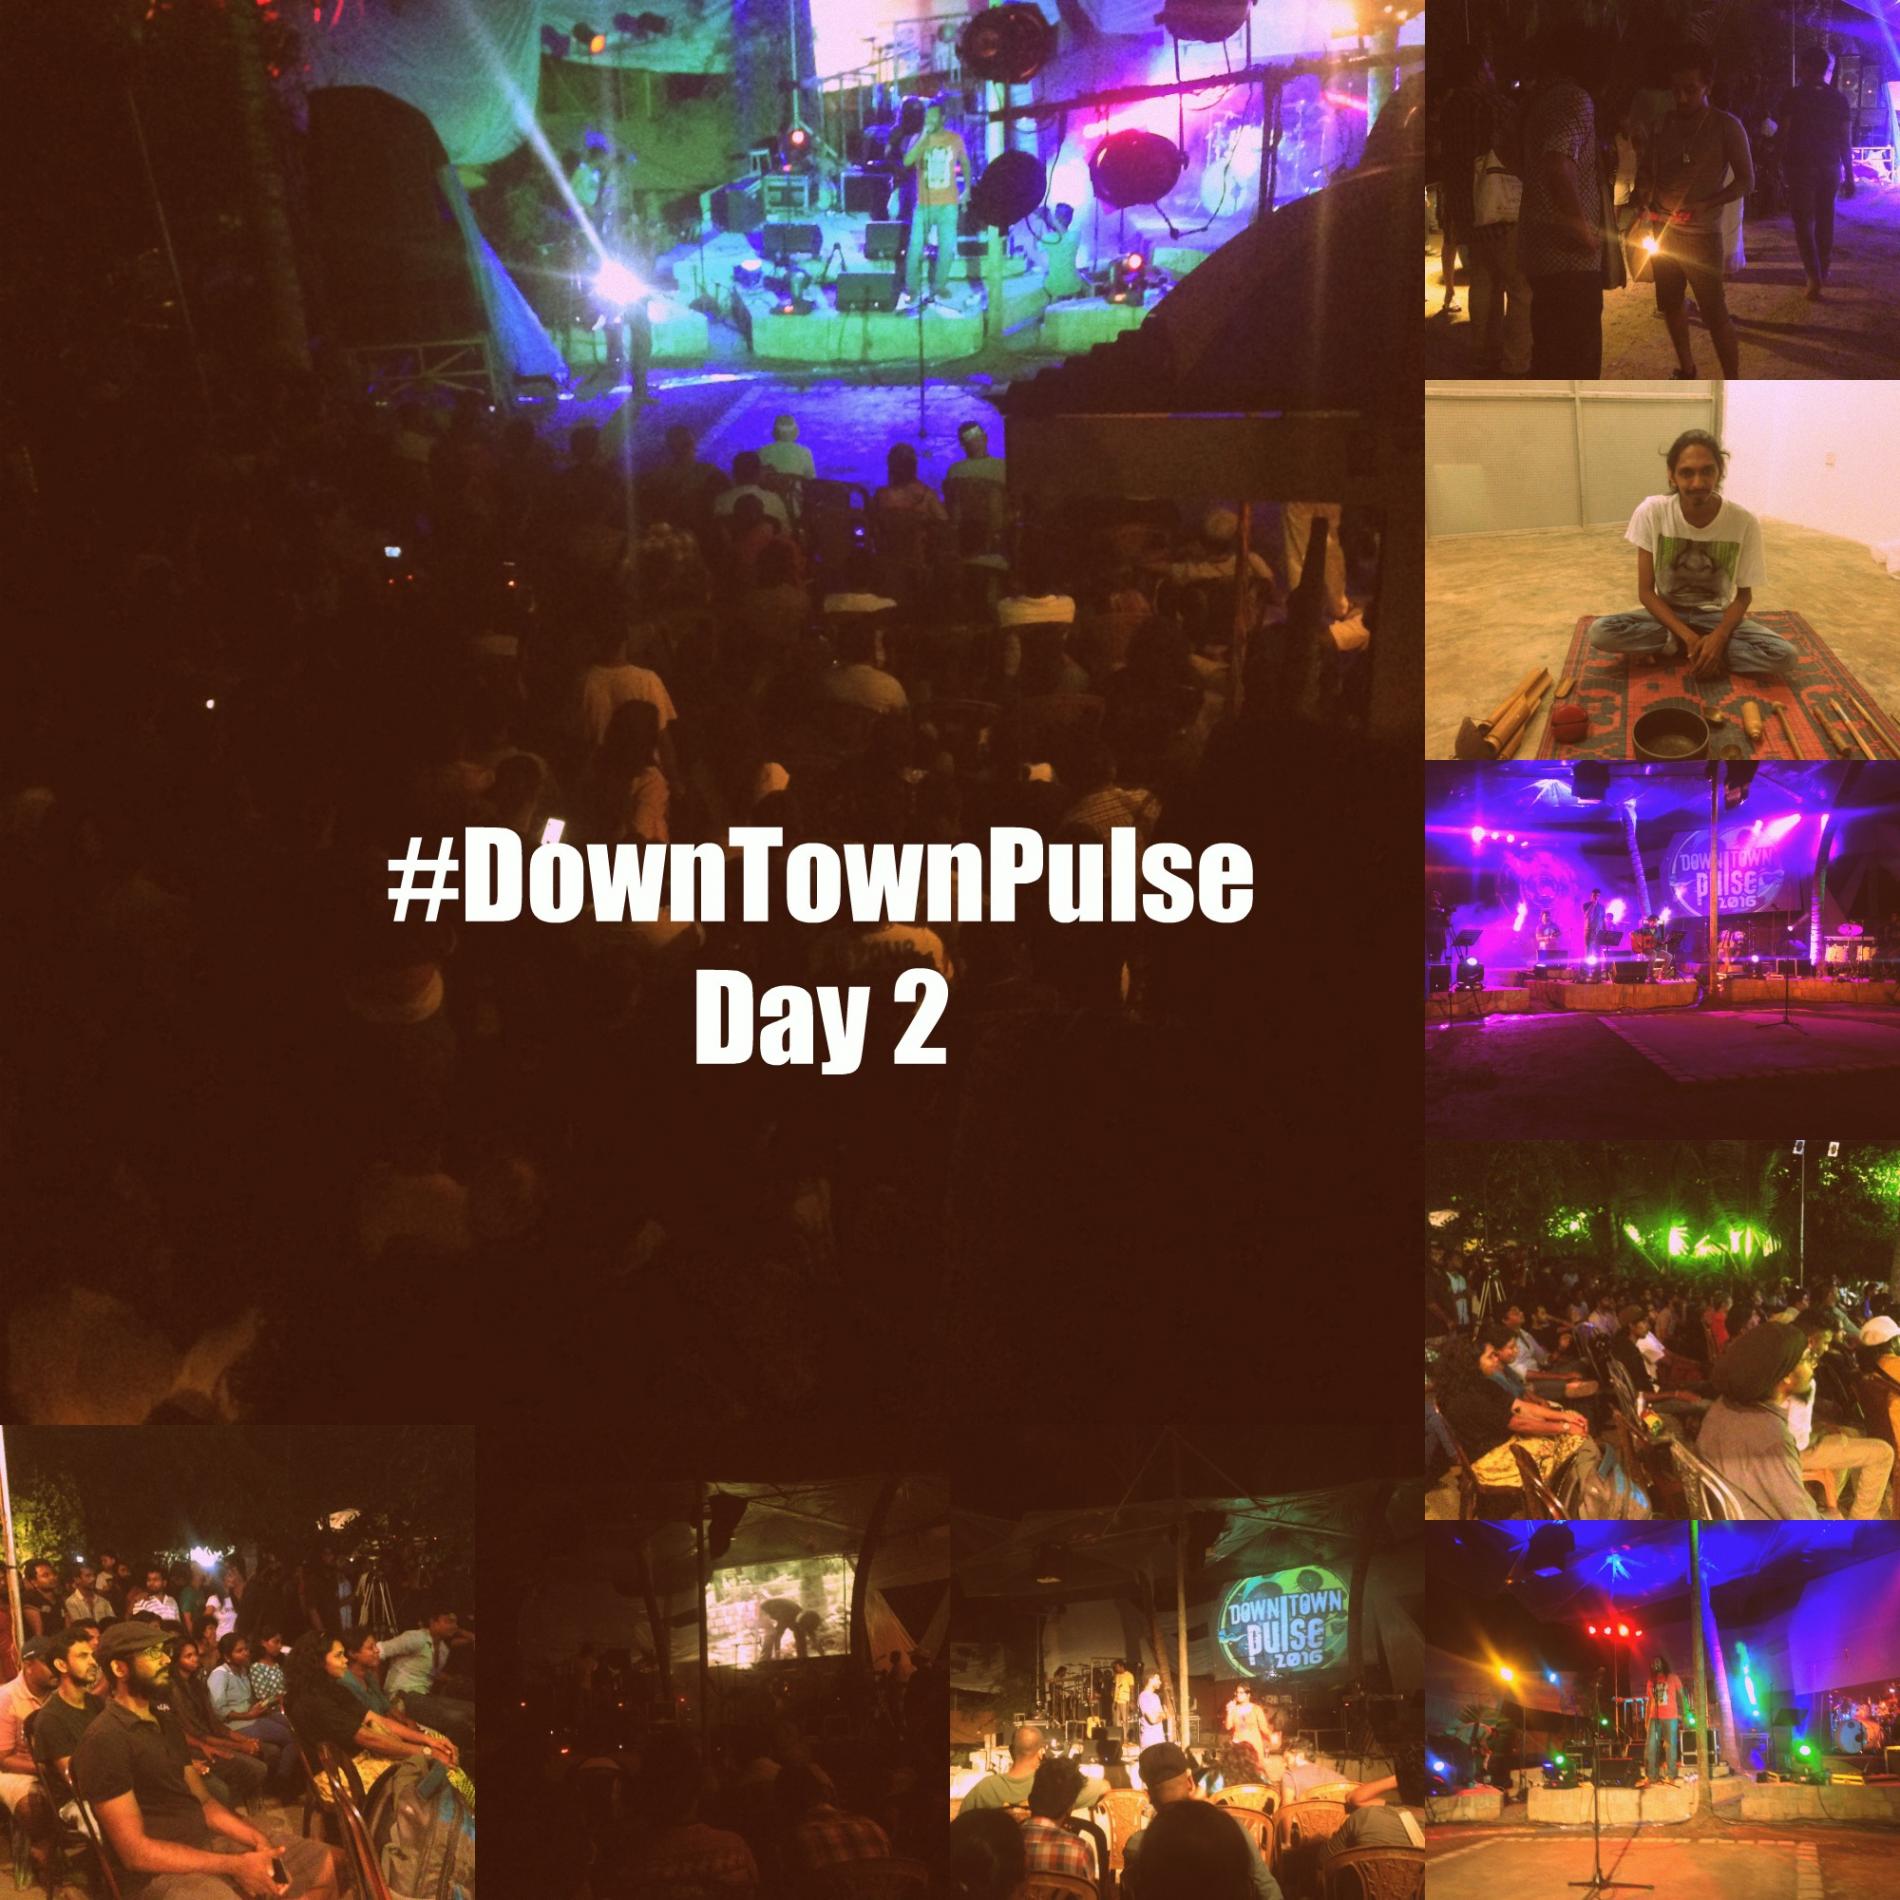 Missed Out On Day 2 Of Down Town Pulse? Here’s What You Missed